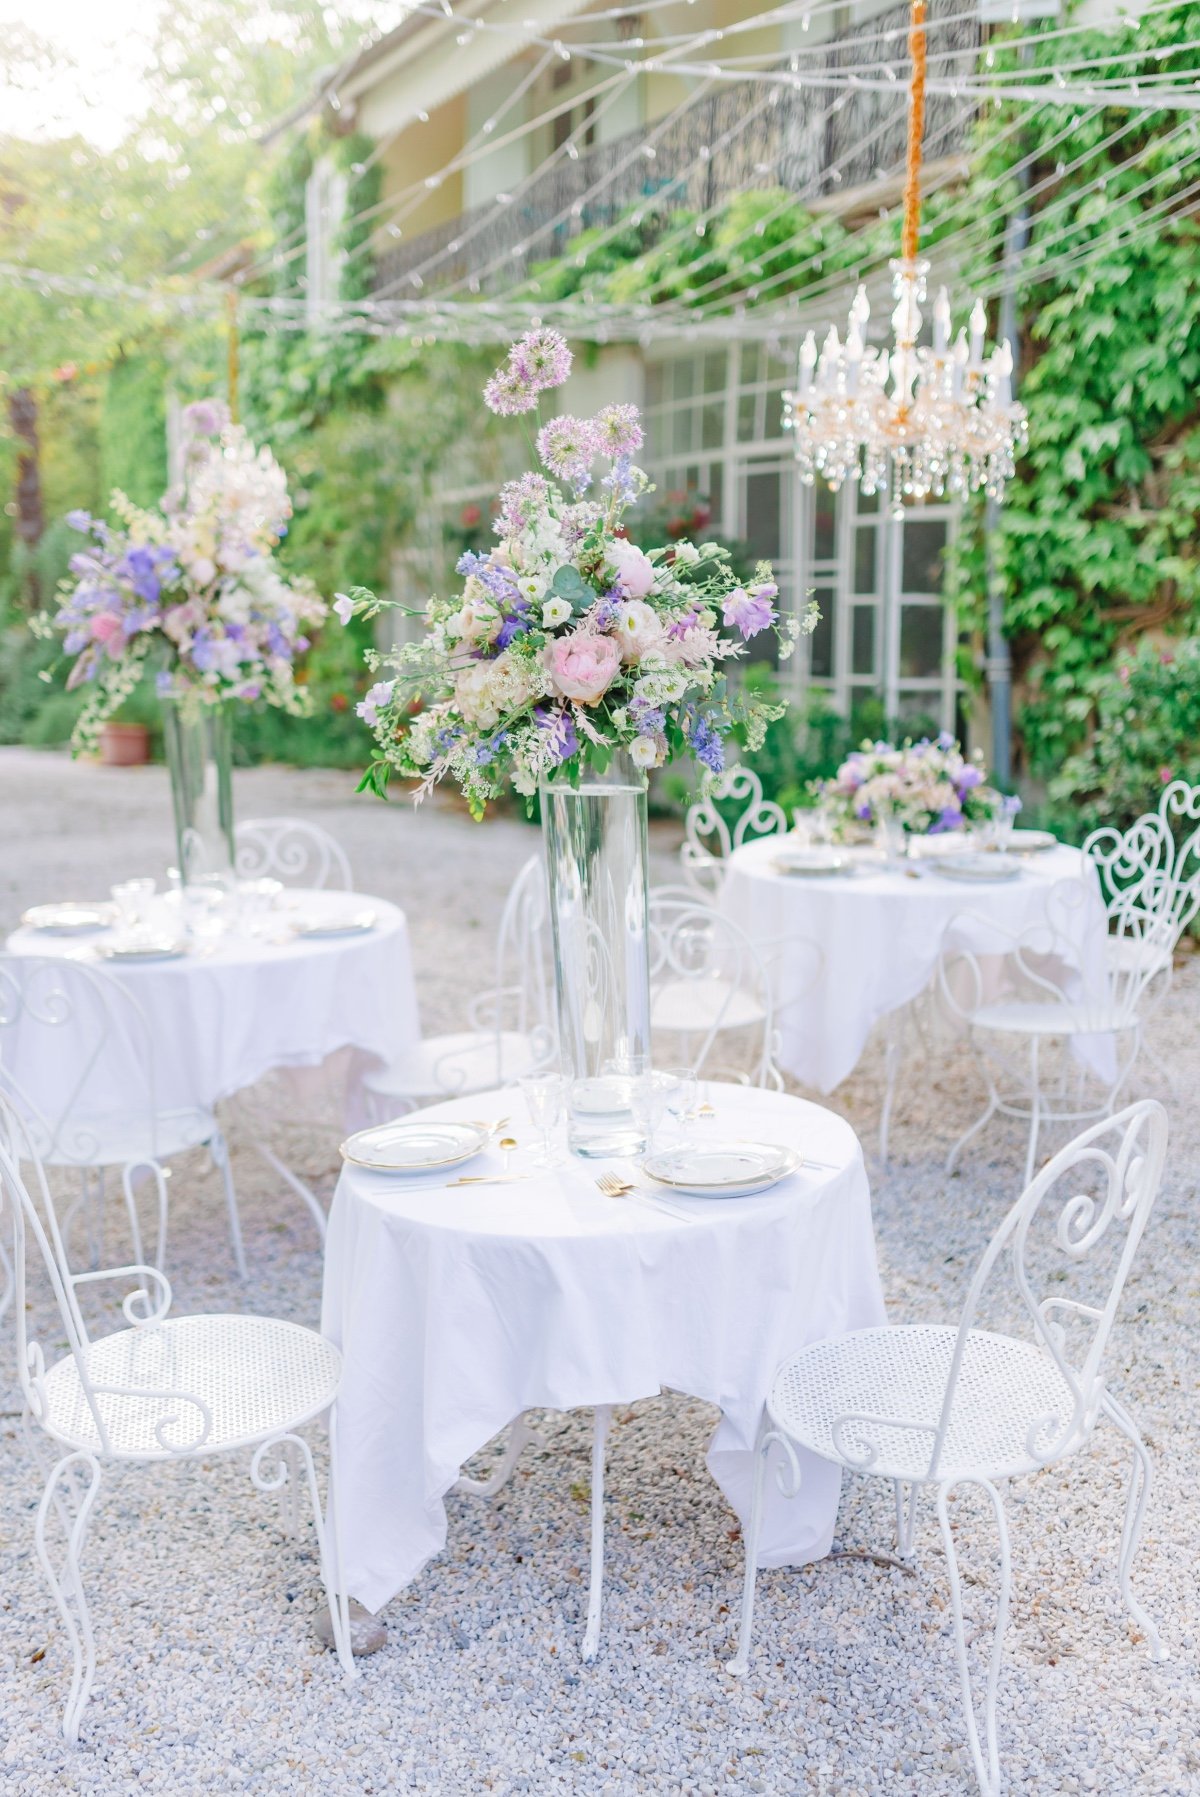 Reception tables with centerpiece and crystal chandelier